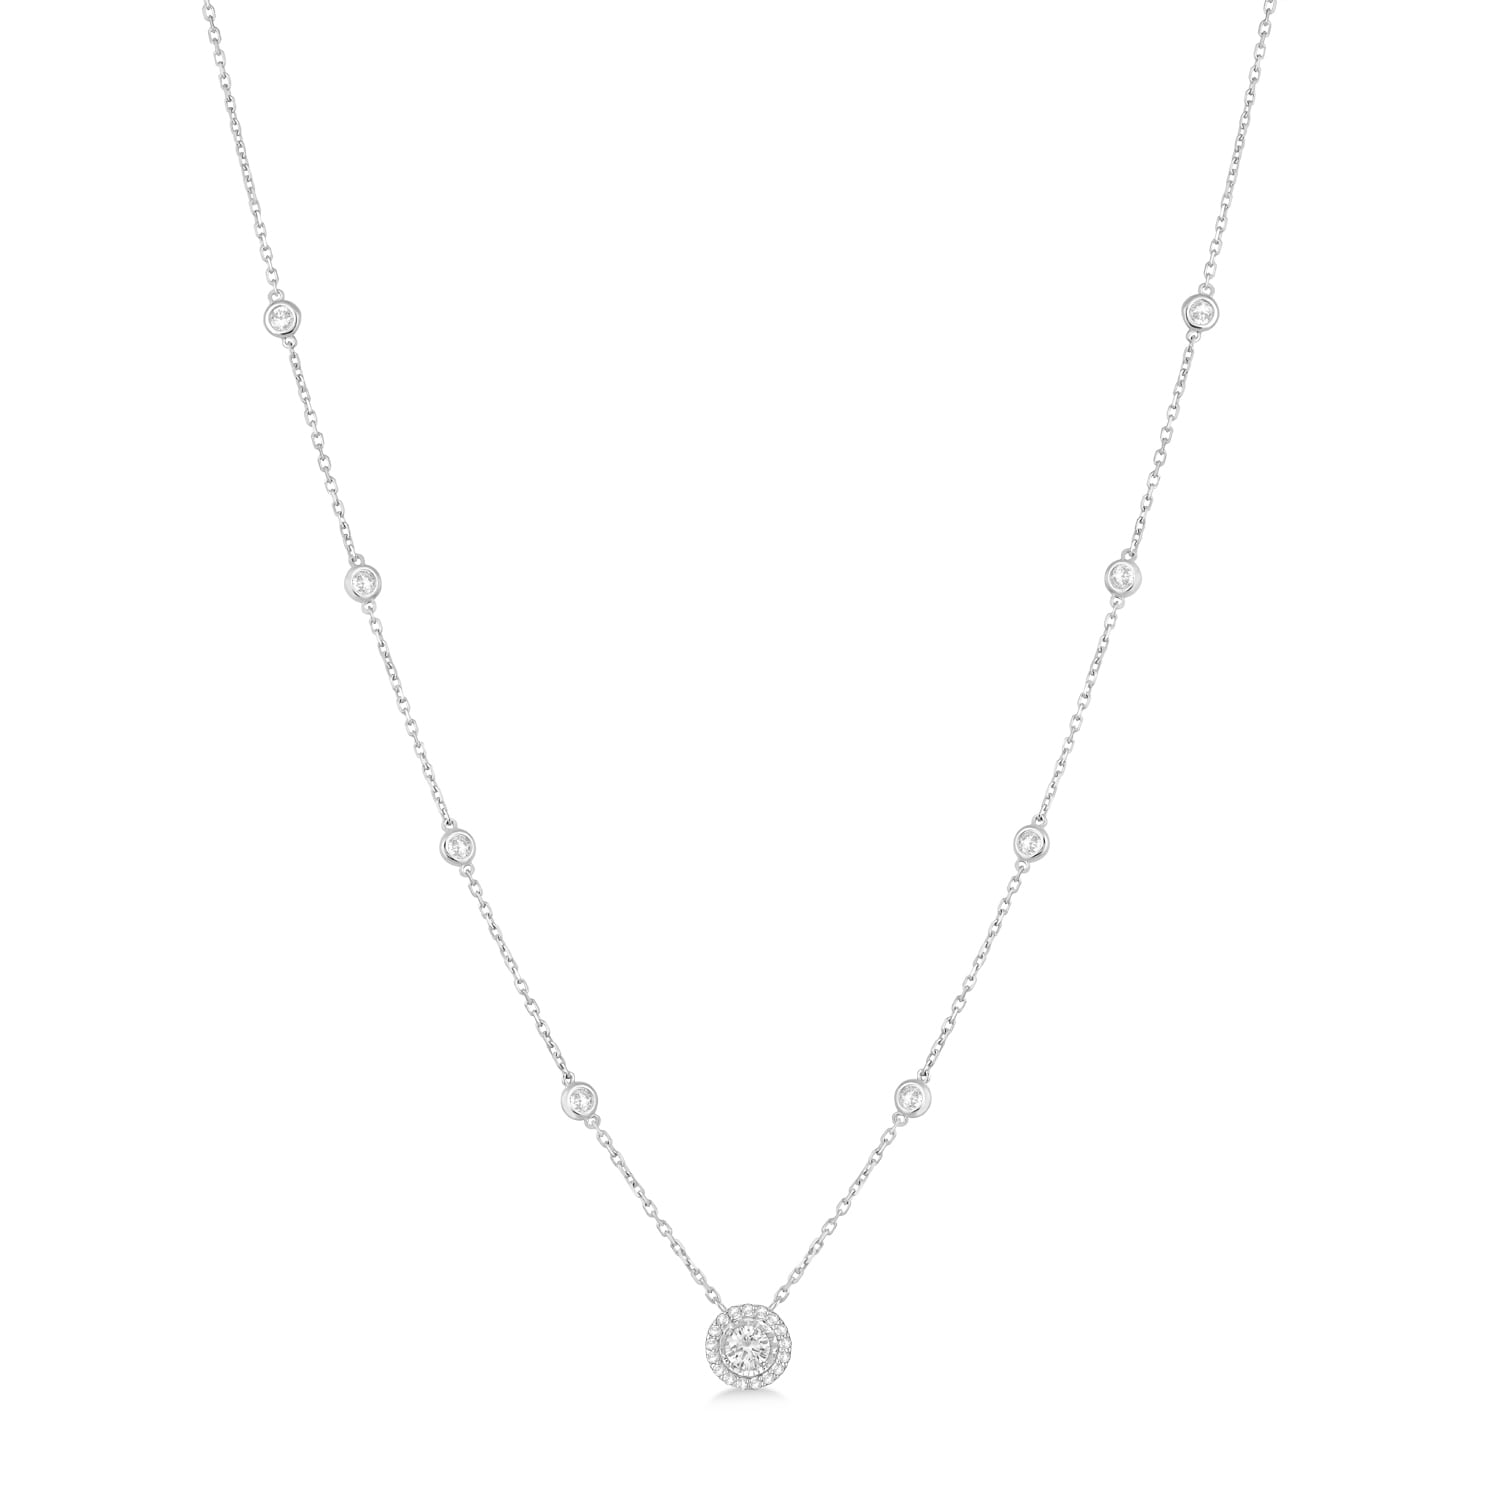 Diamond Halo Pendant Station Necklace in 14k White Gold (1.00 ctw)